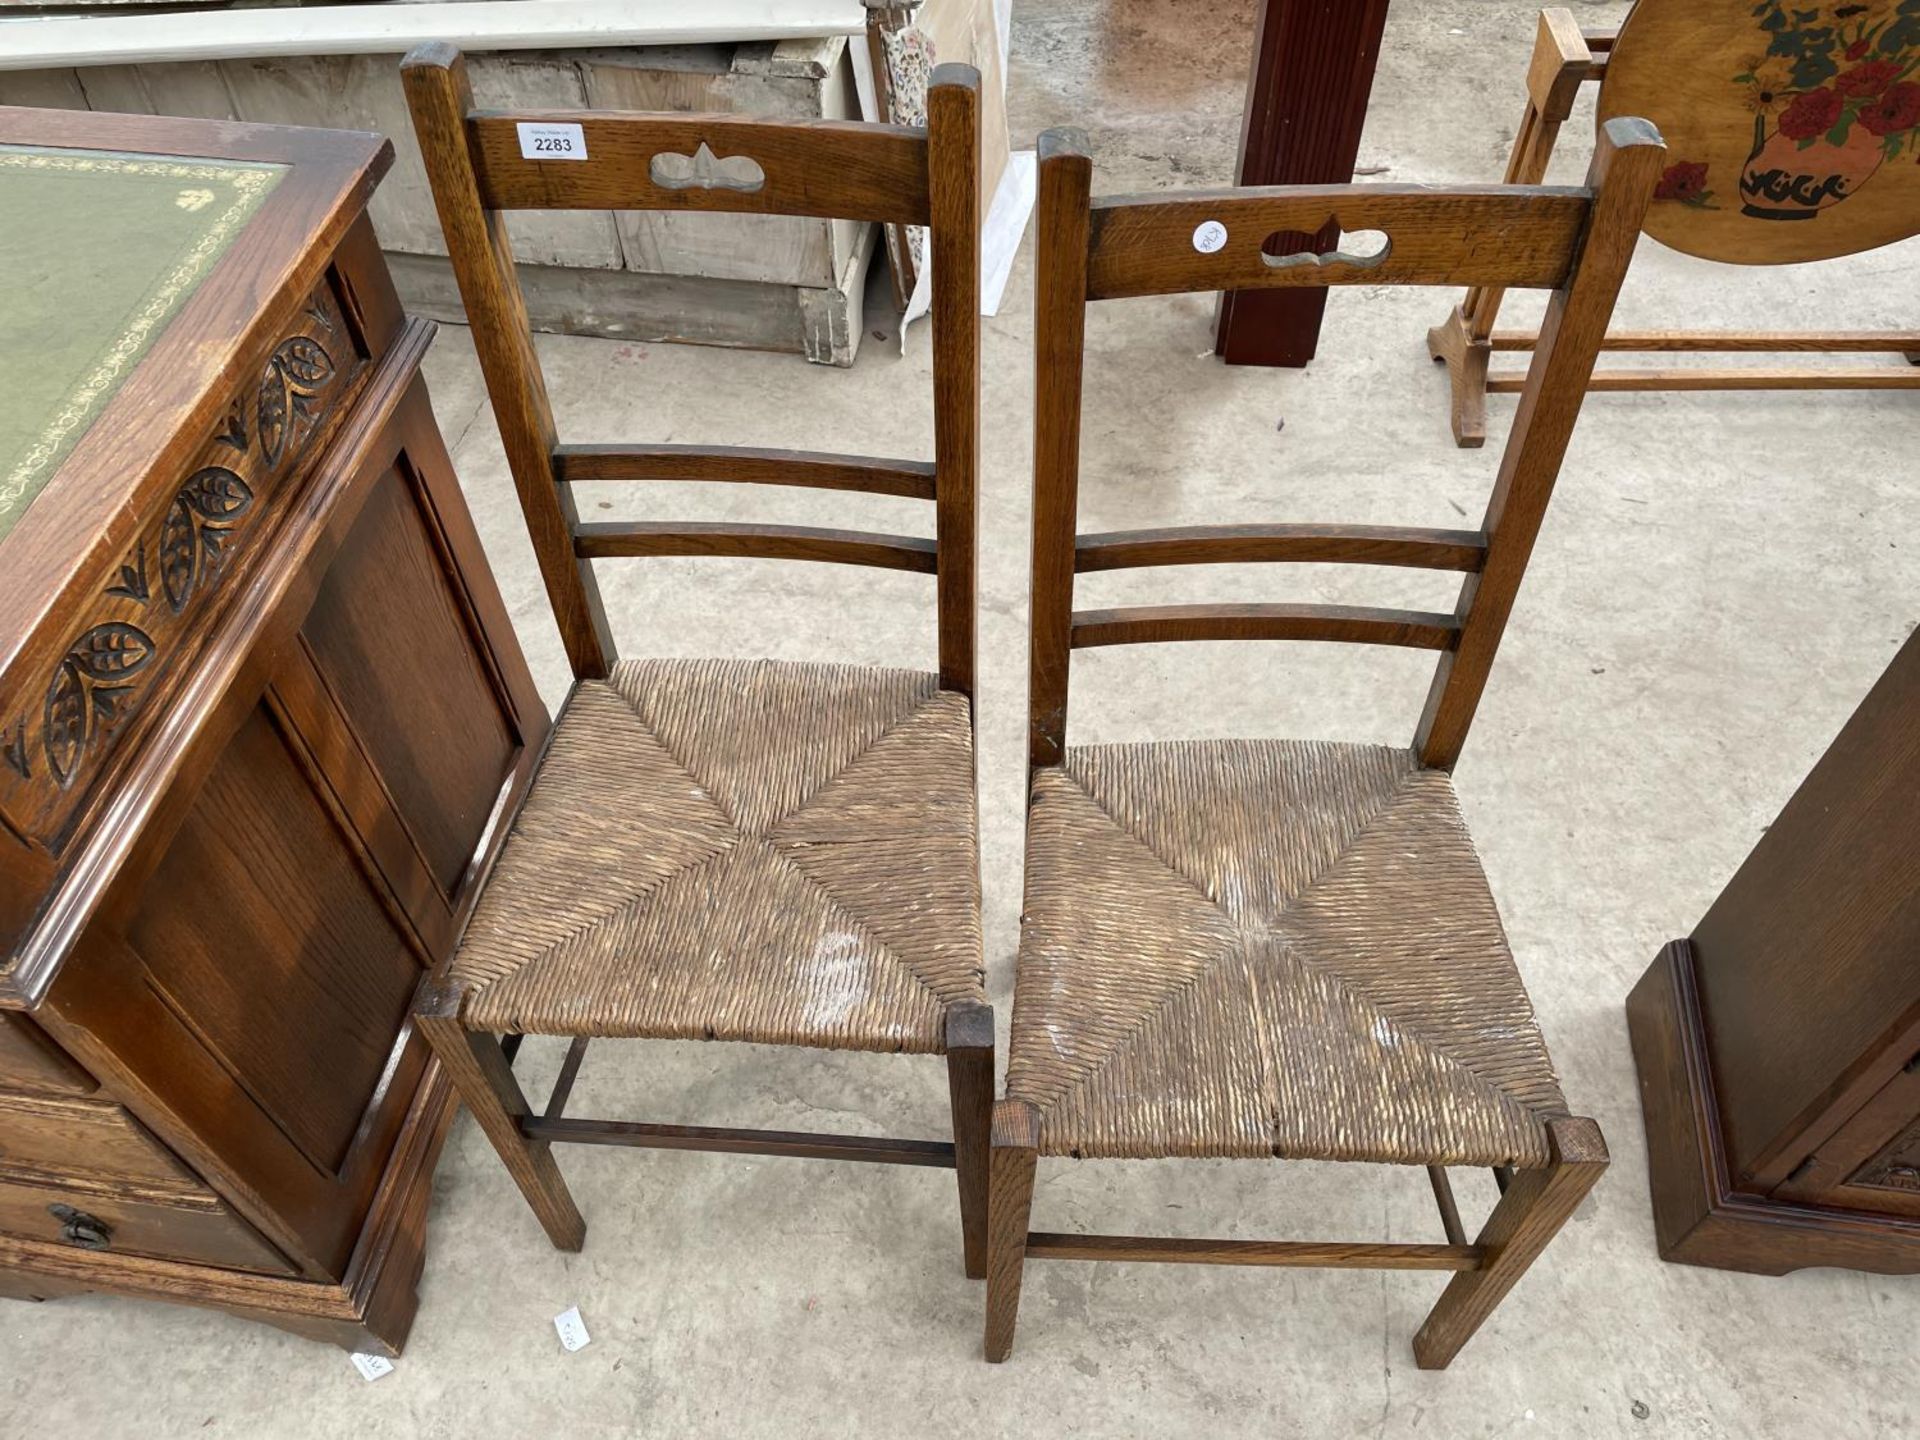 A PAIR OF RUSH SEATED BEDROOM CHAIRS